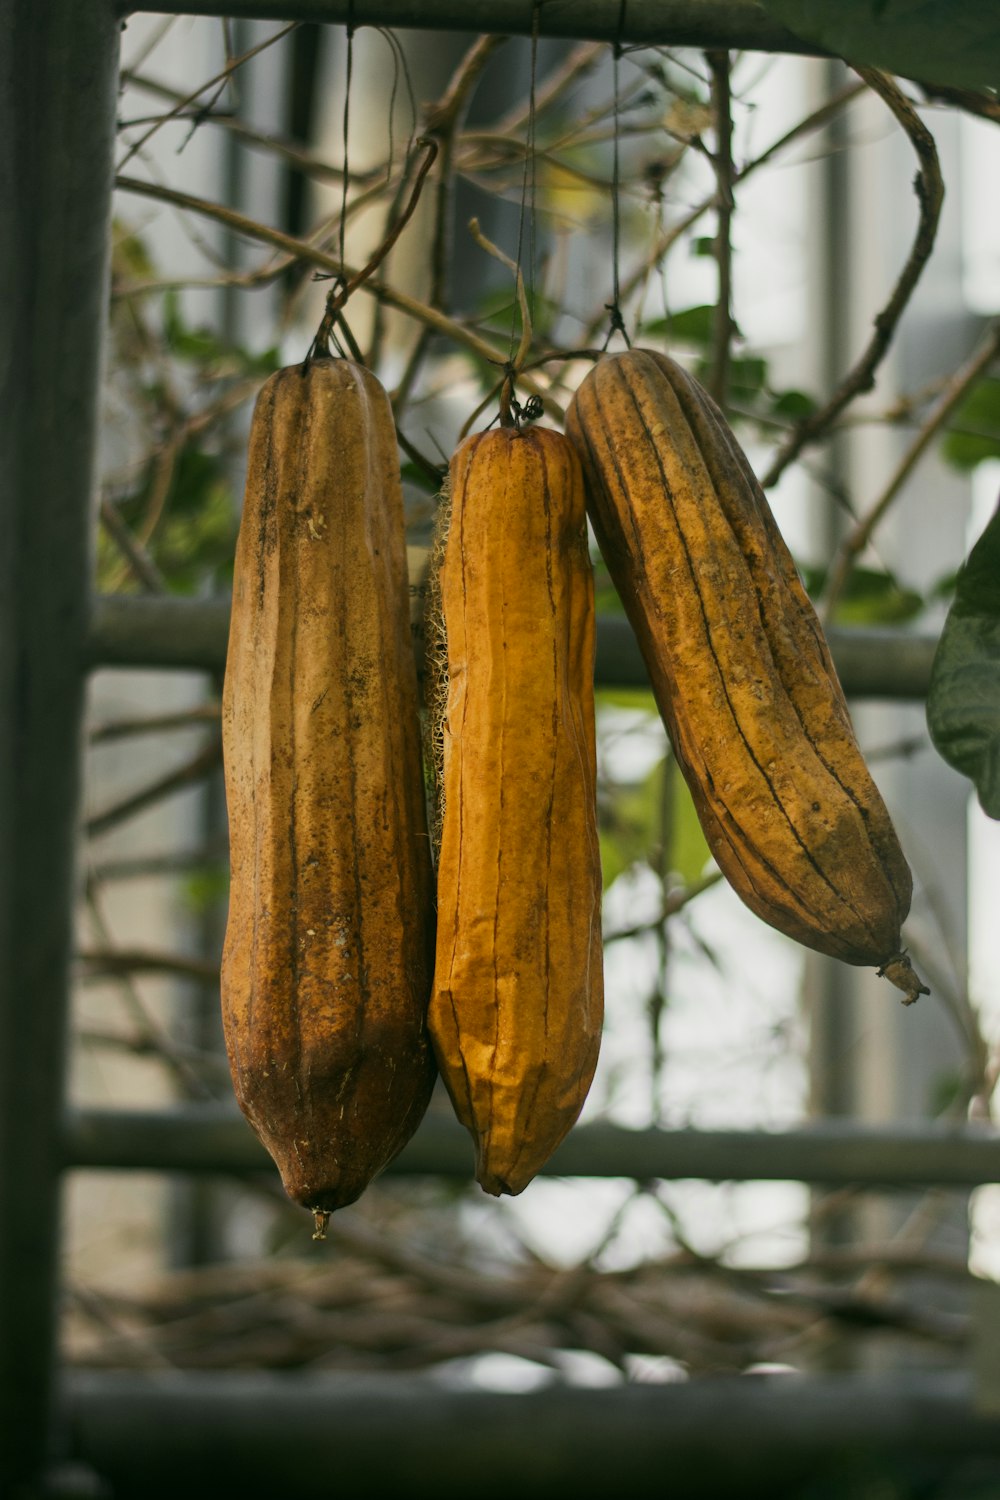 three unripe bananas hanging from a tree